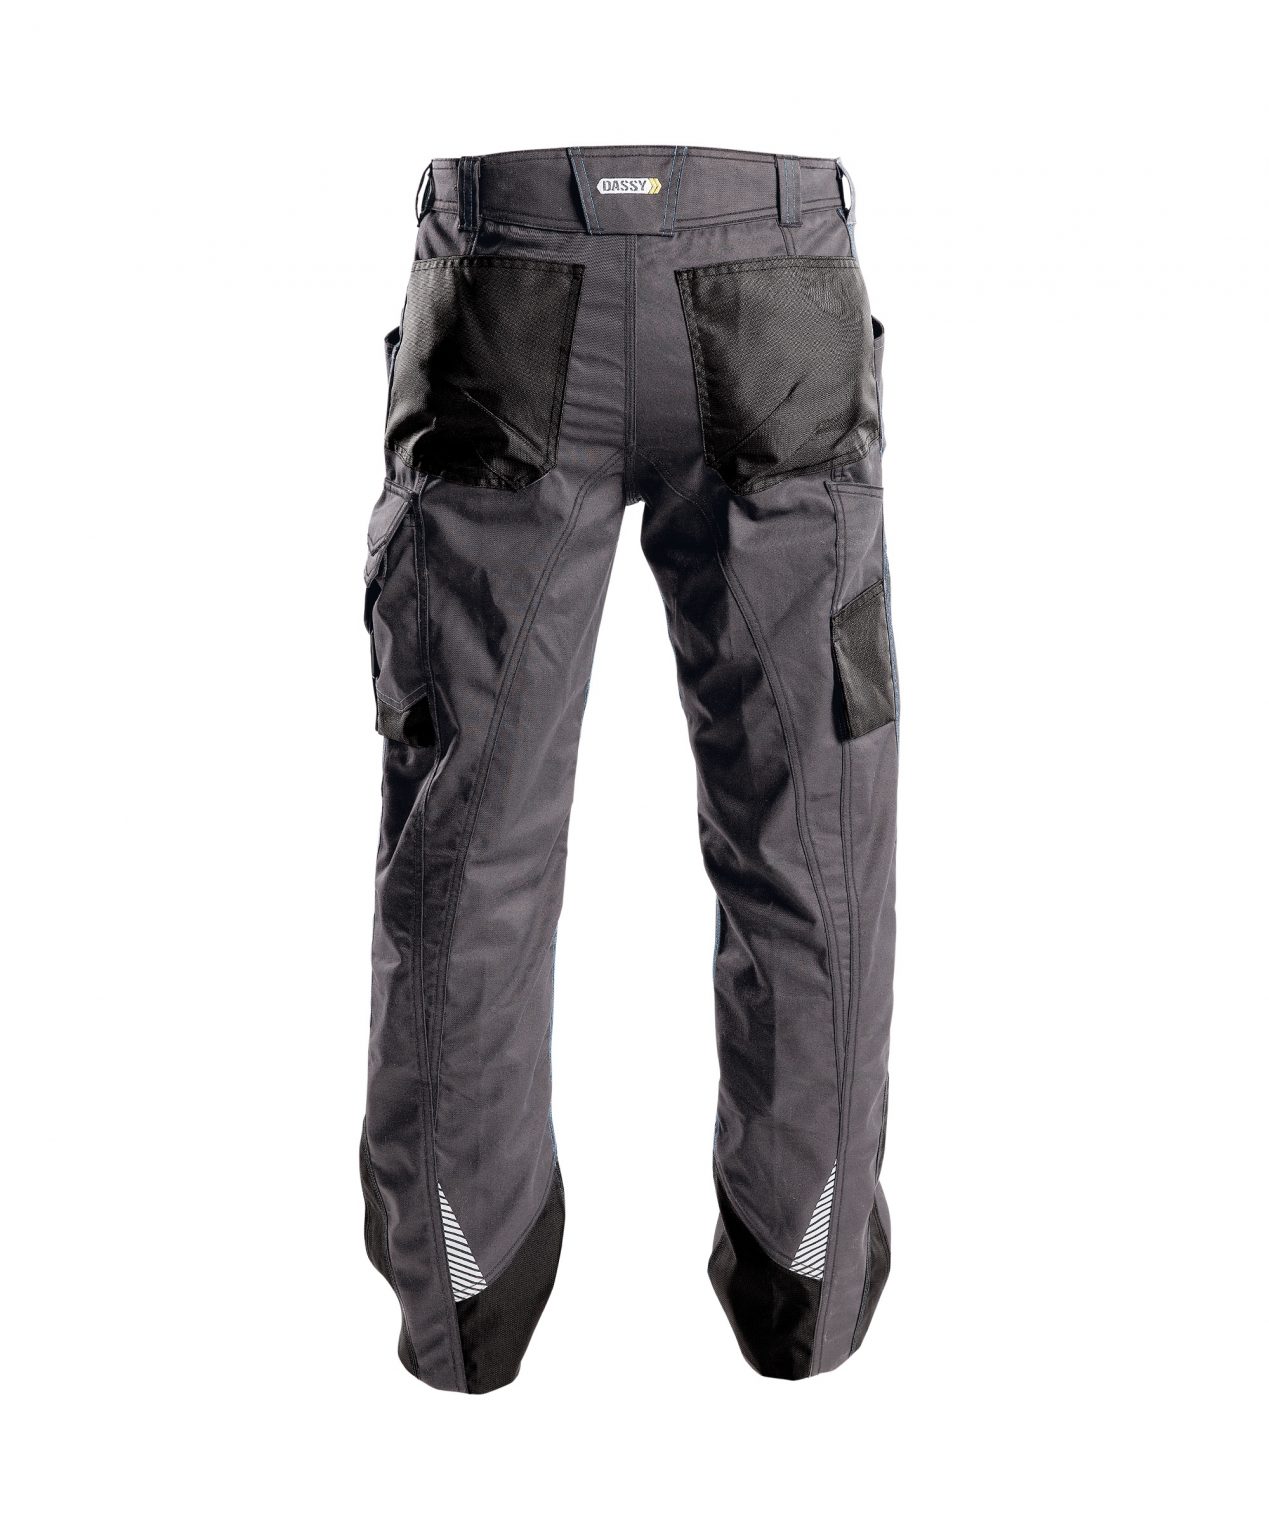 spectrum work trousers anthracite grey black back